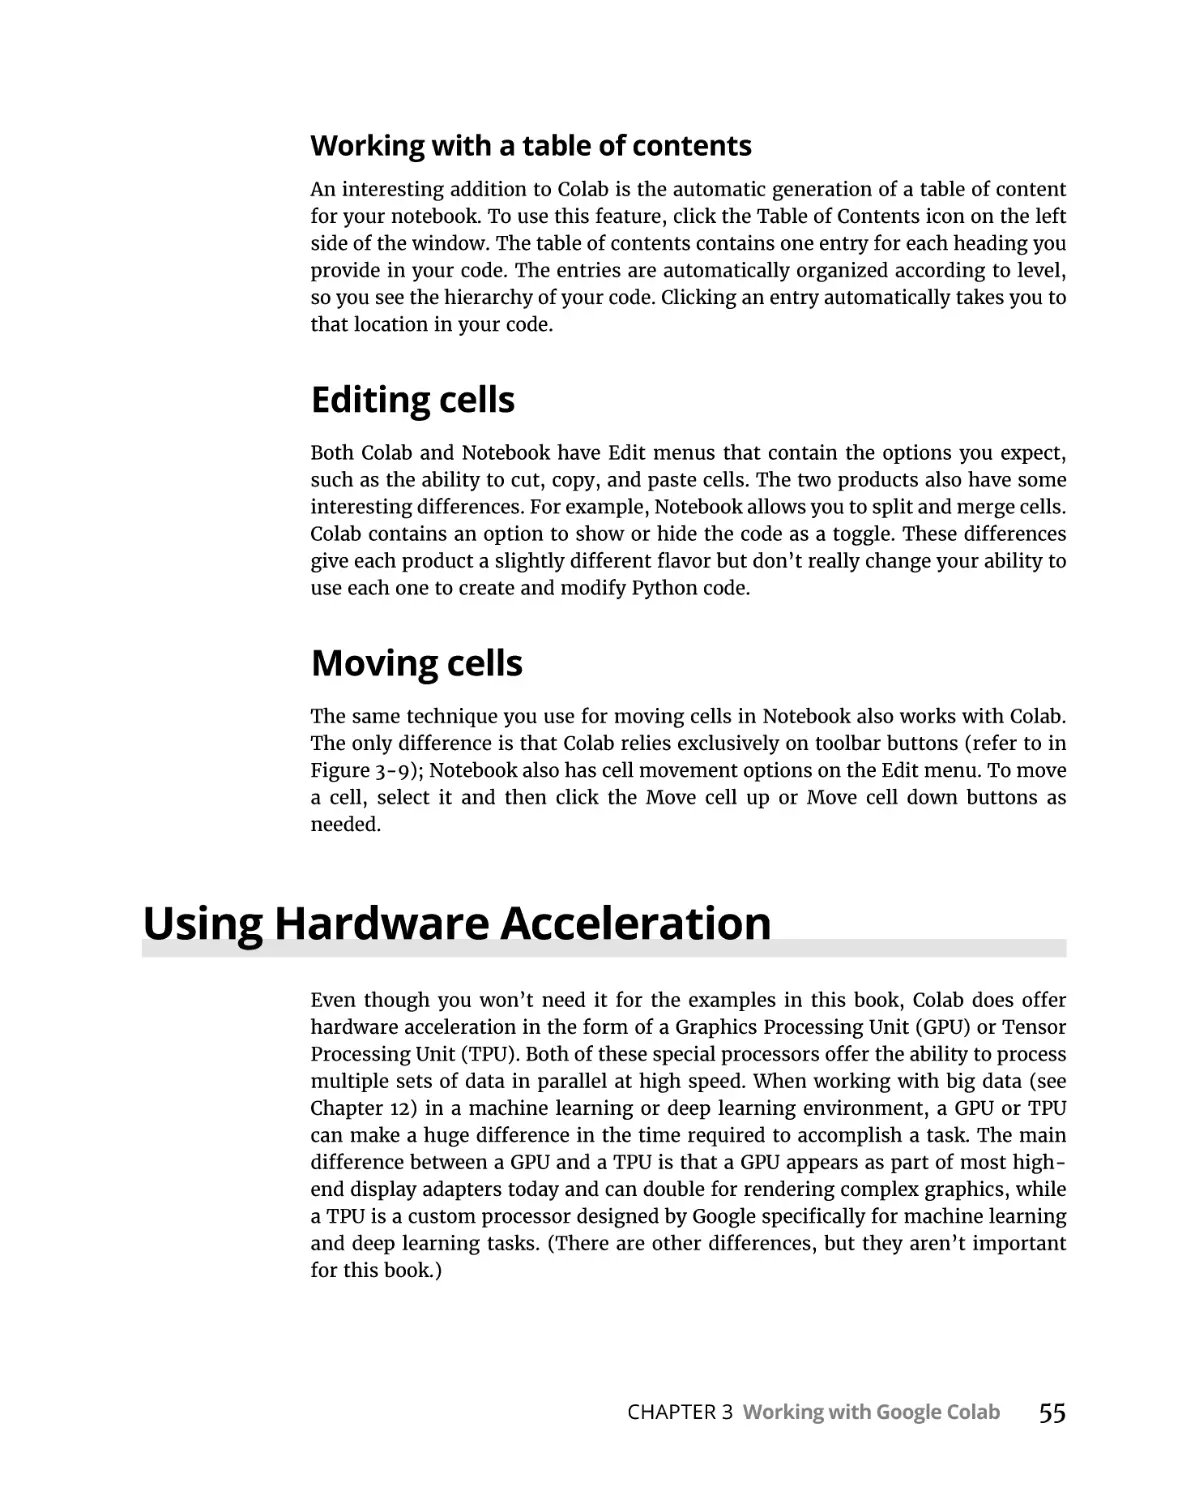 Editing cells
Moving cells
Using Hardware Acceleration